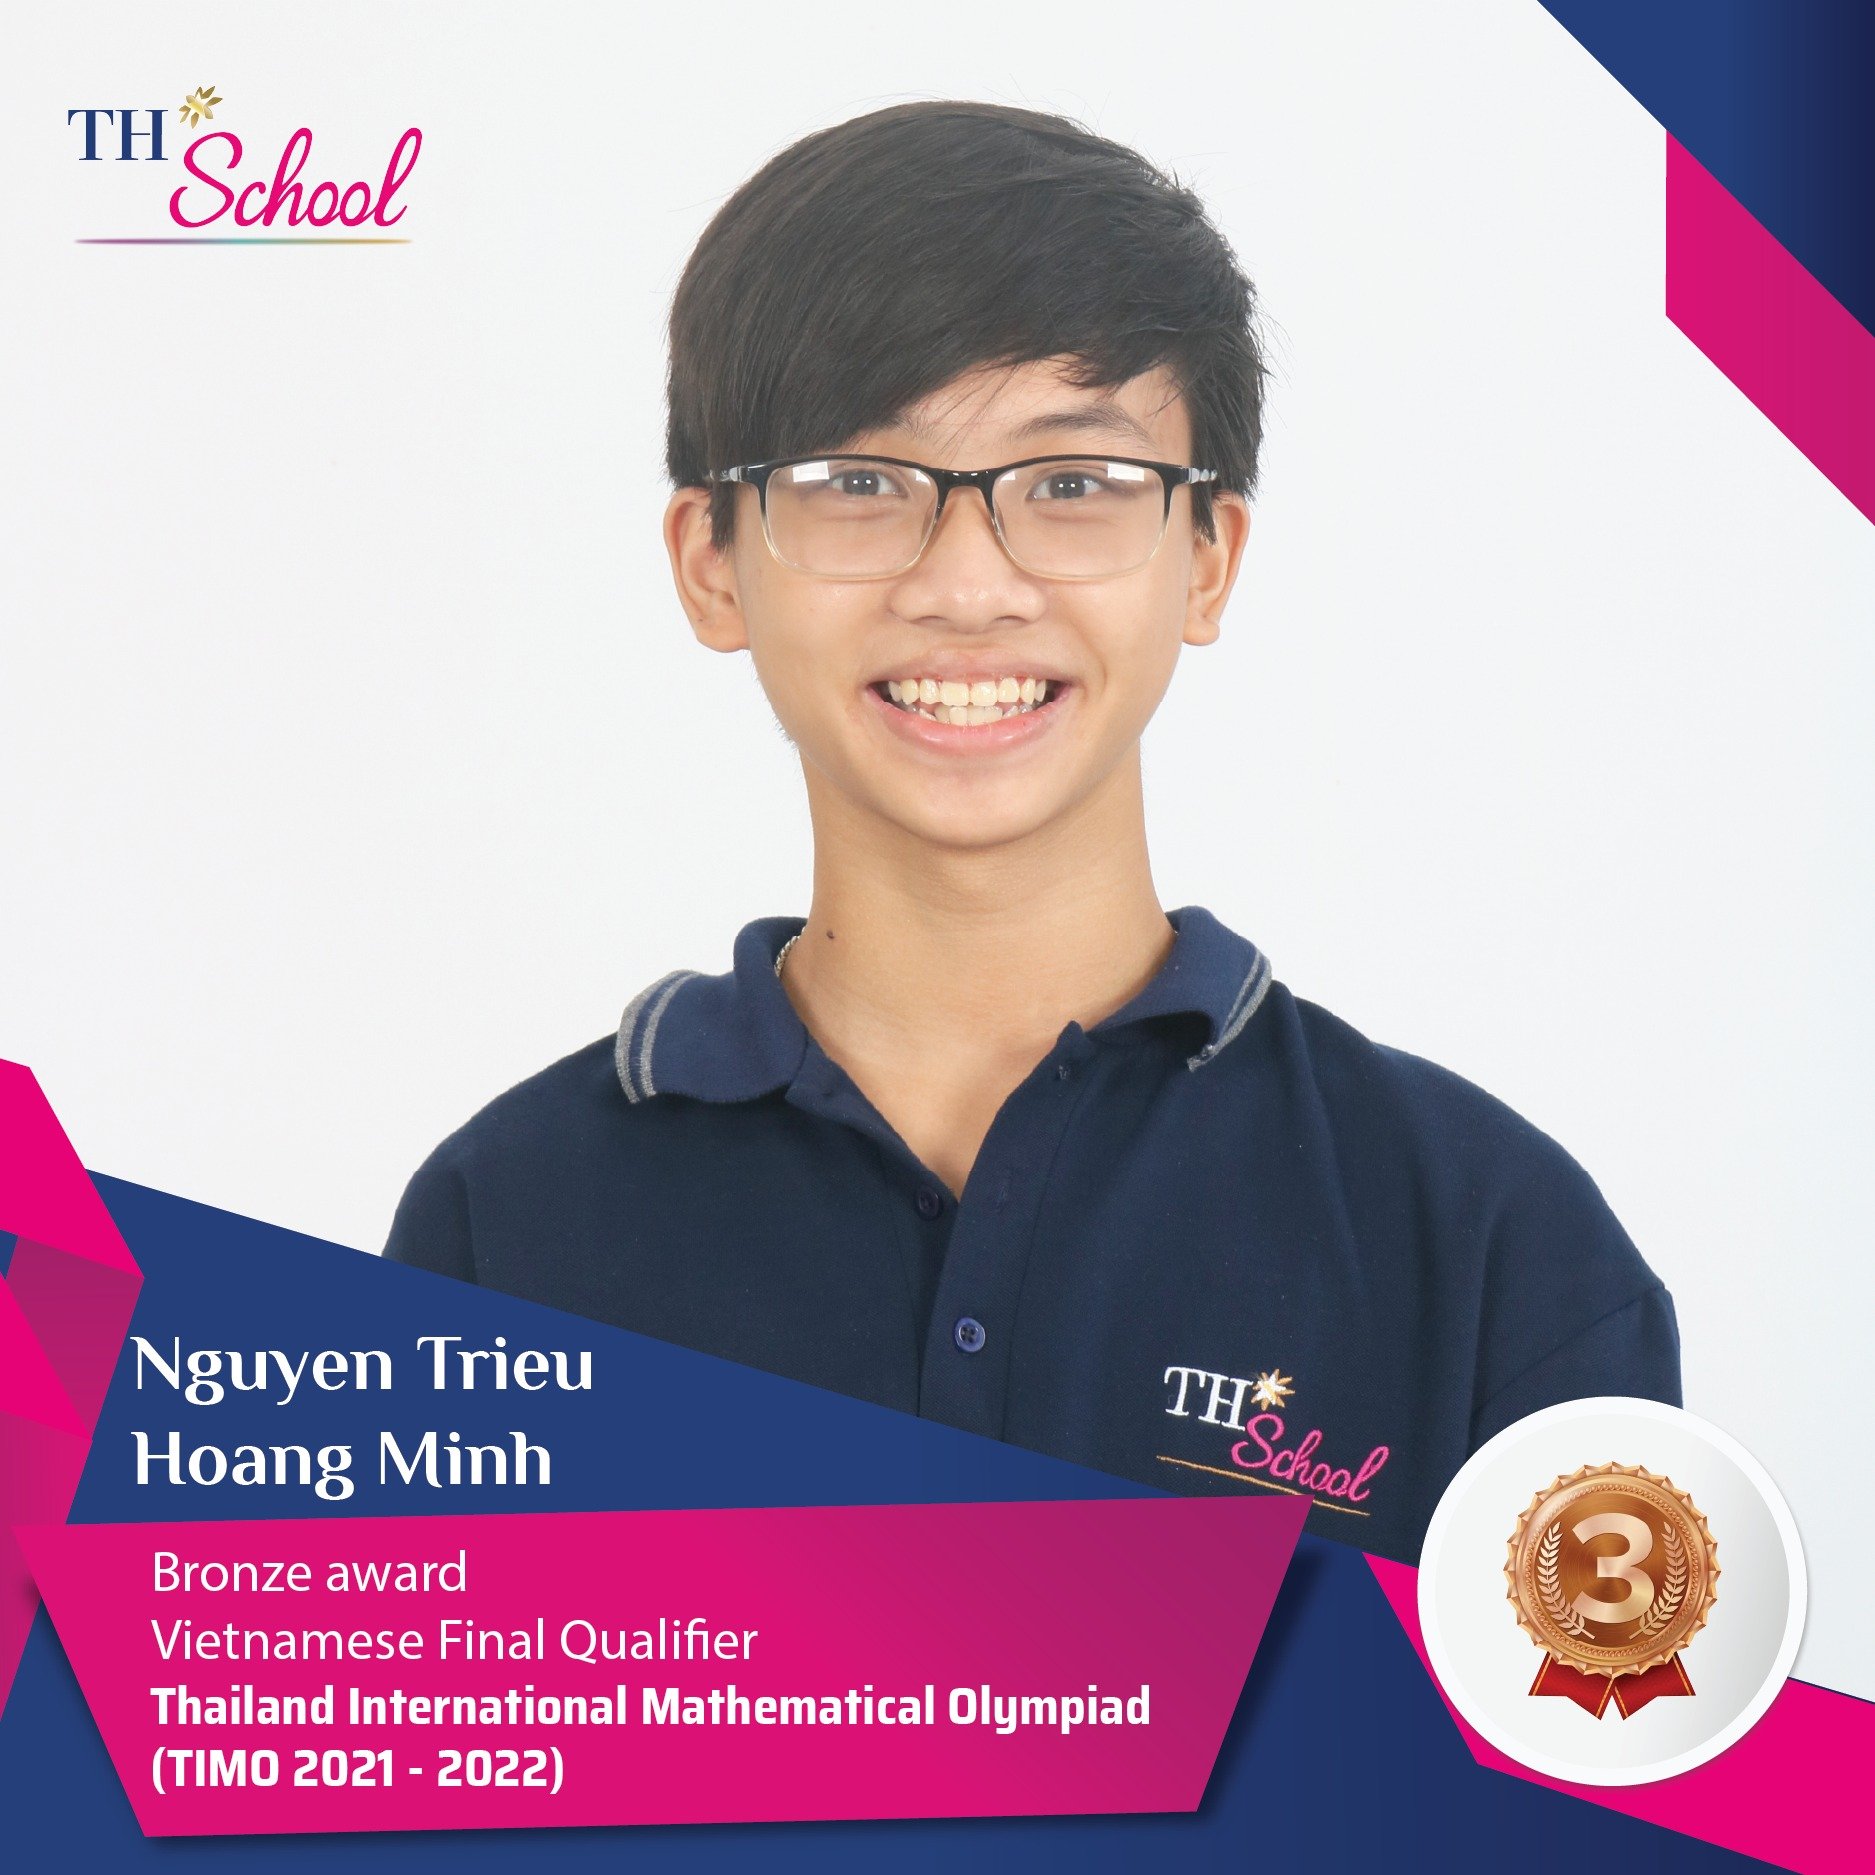 Nguyen Trieu Hoang Minh, grade 10 won a bronze award in the National Final round of the Thailand International Mathematical Olympiad 2021 - 2022 (TIMO 2021 - 2022)